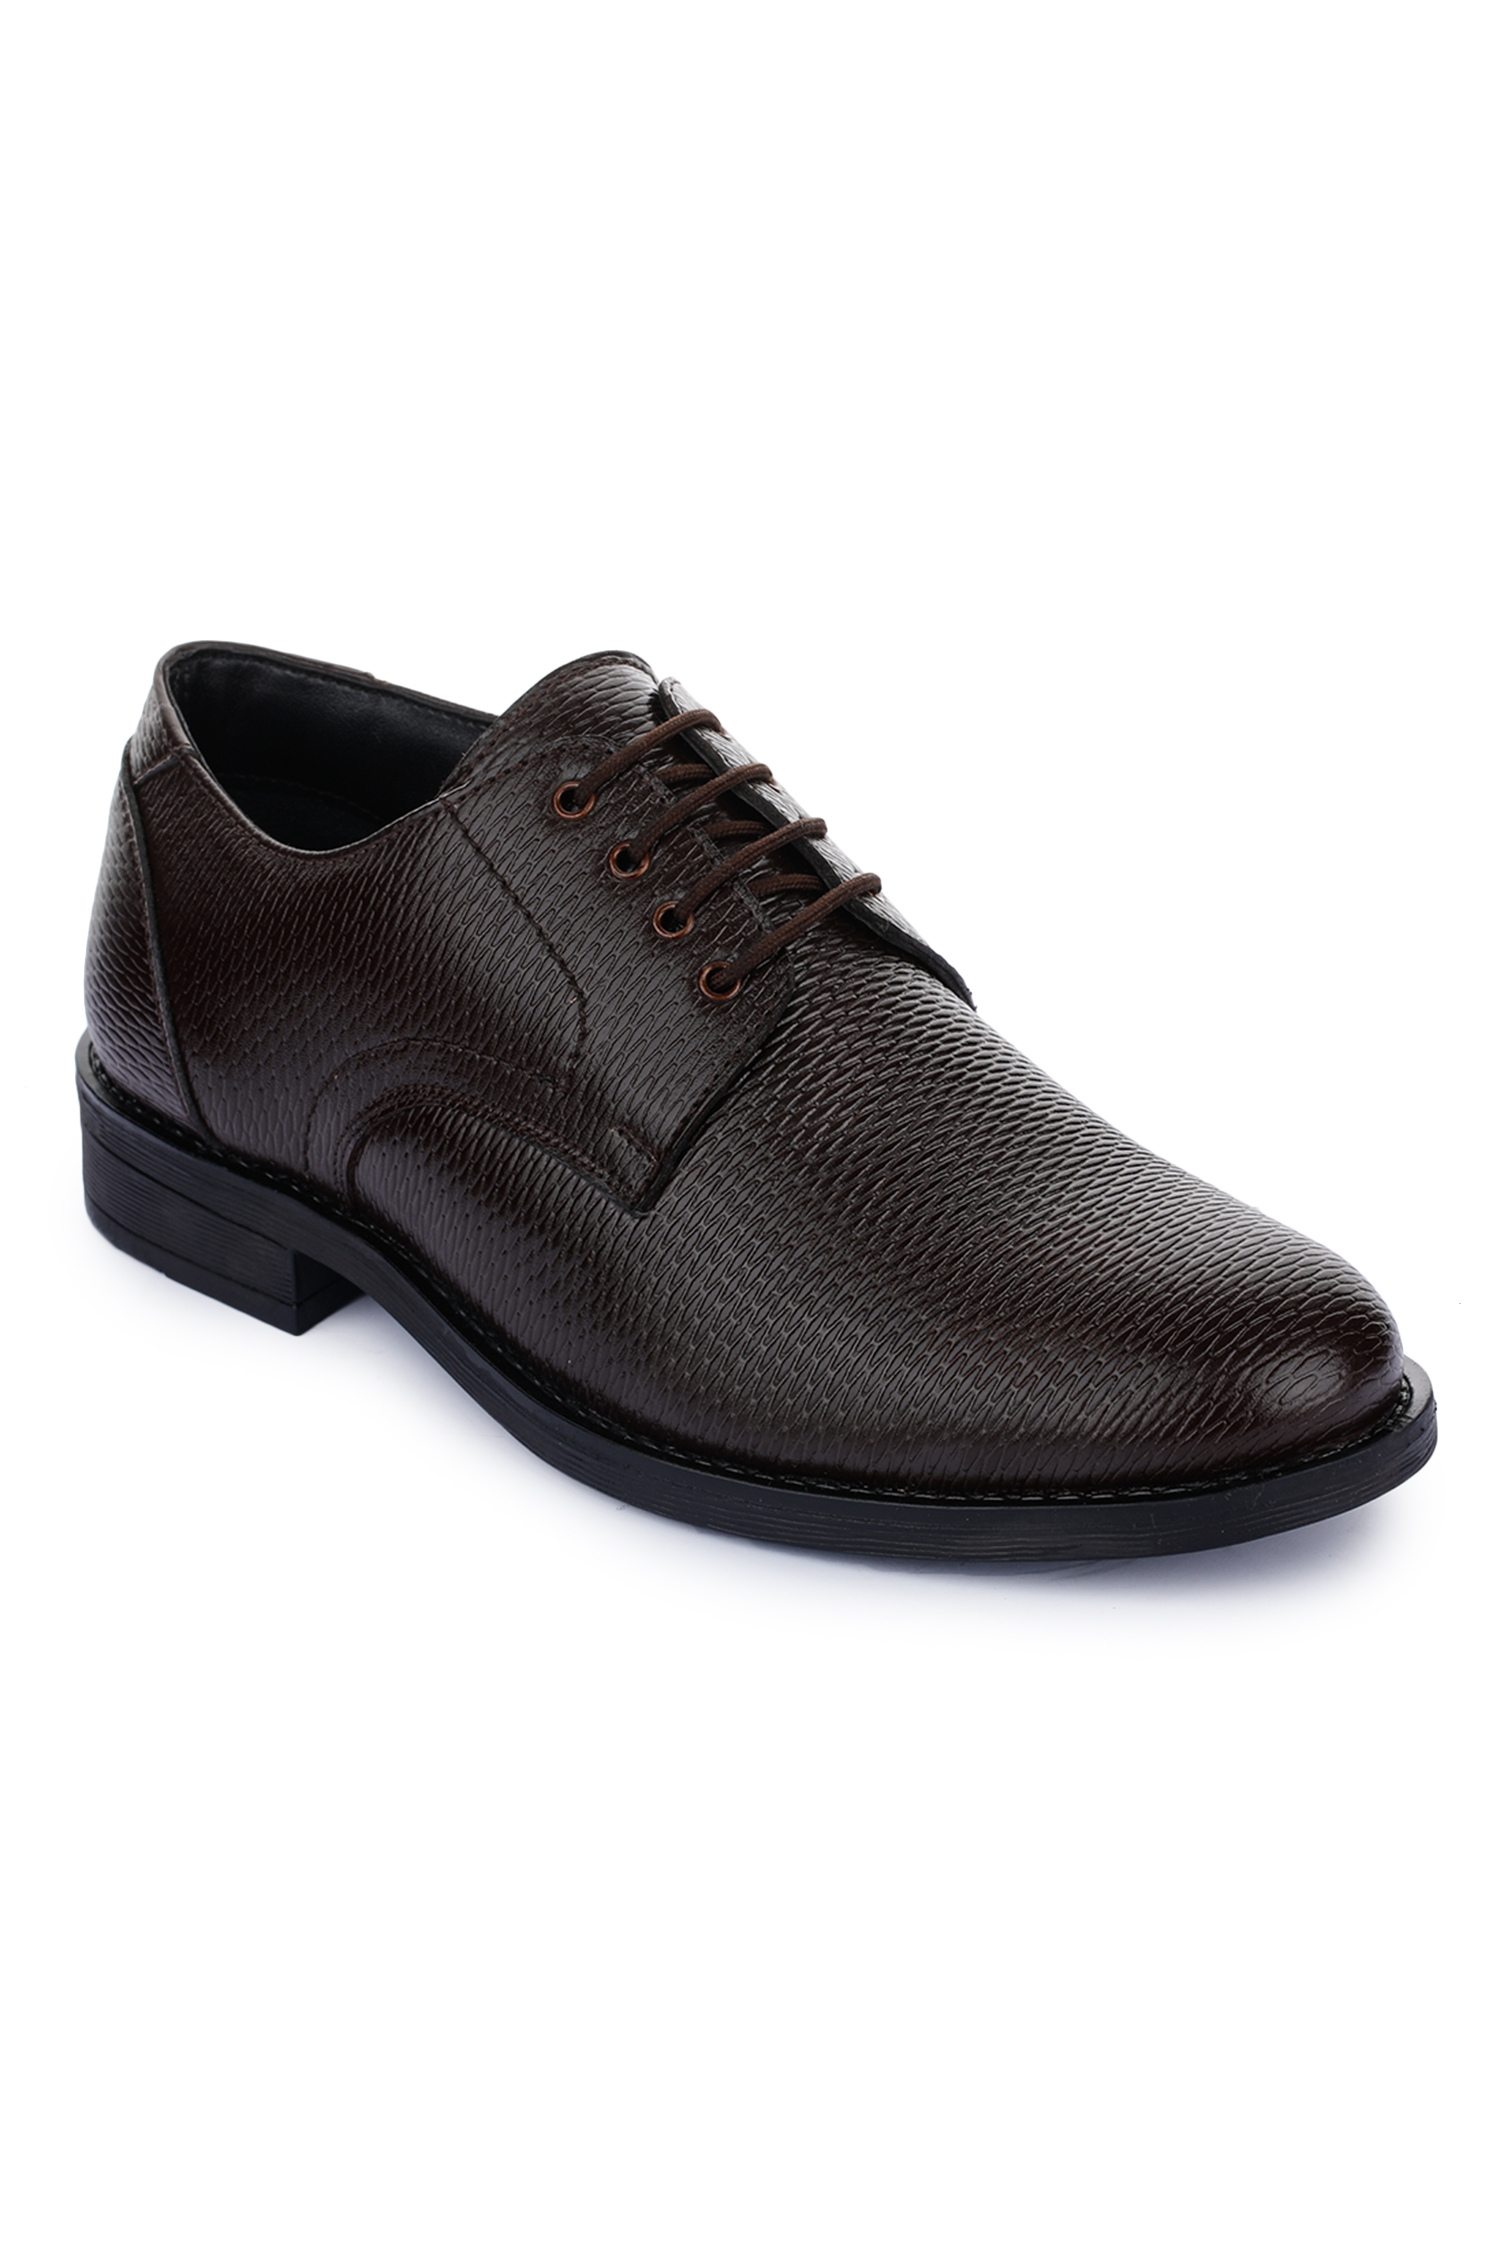 Liberty | Liberty Fortune Brown Formal Derby Shoes DRE-1_Brown For - Men